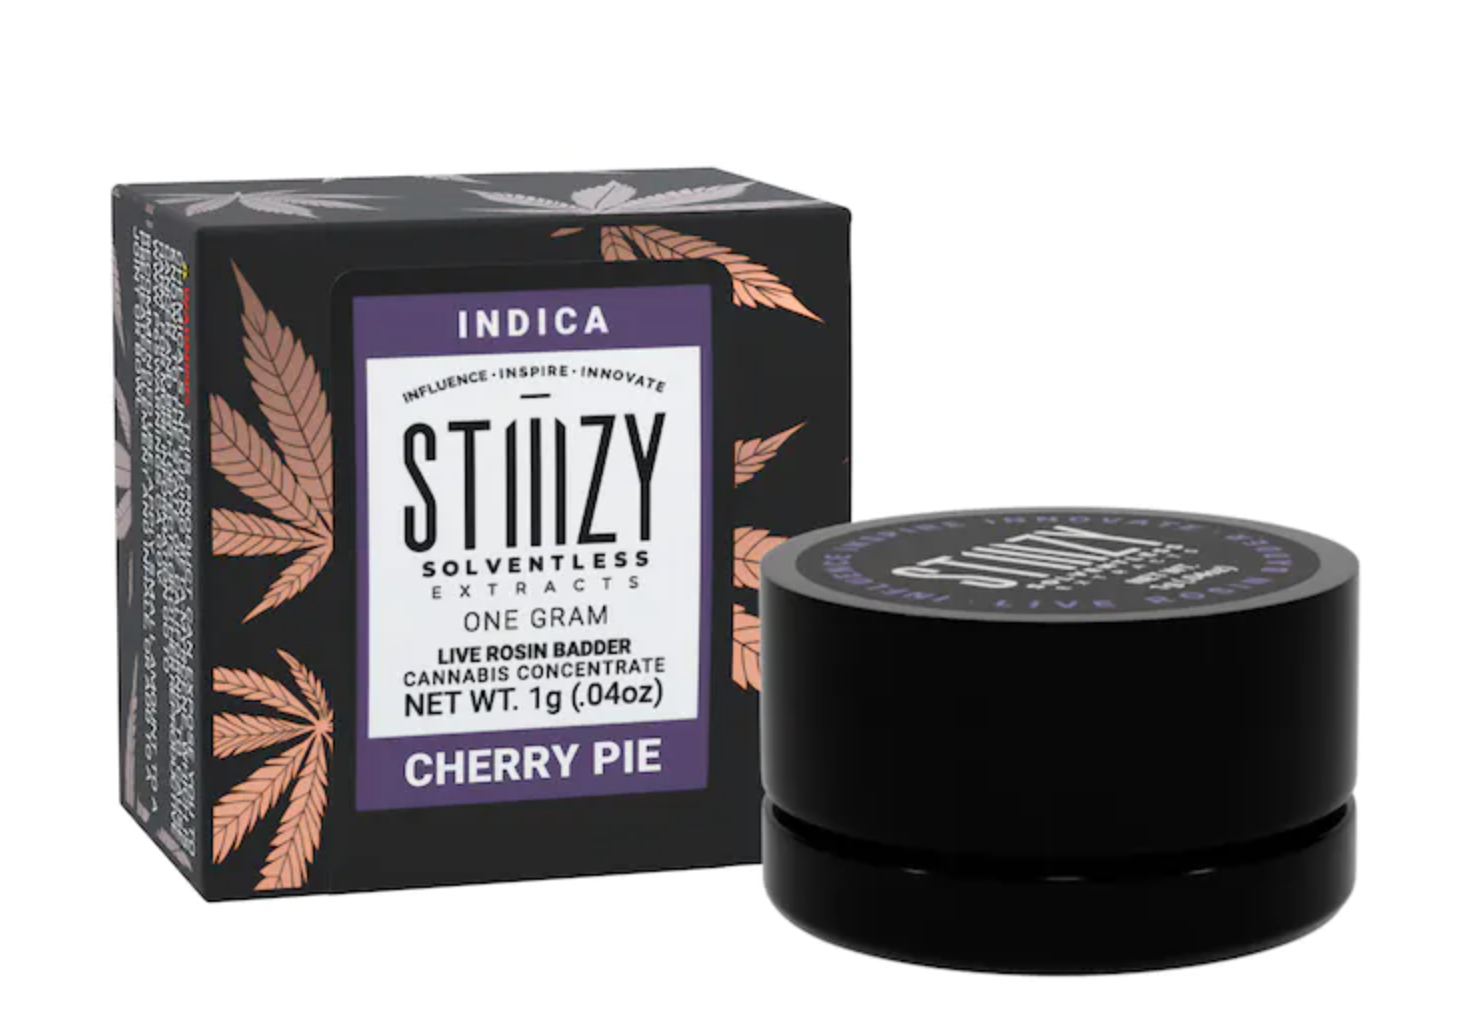 A black box with live rosin badder made from cannabis flower of the Cherry Pie strain sits next to its black jar.